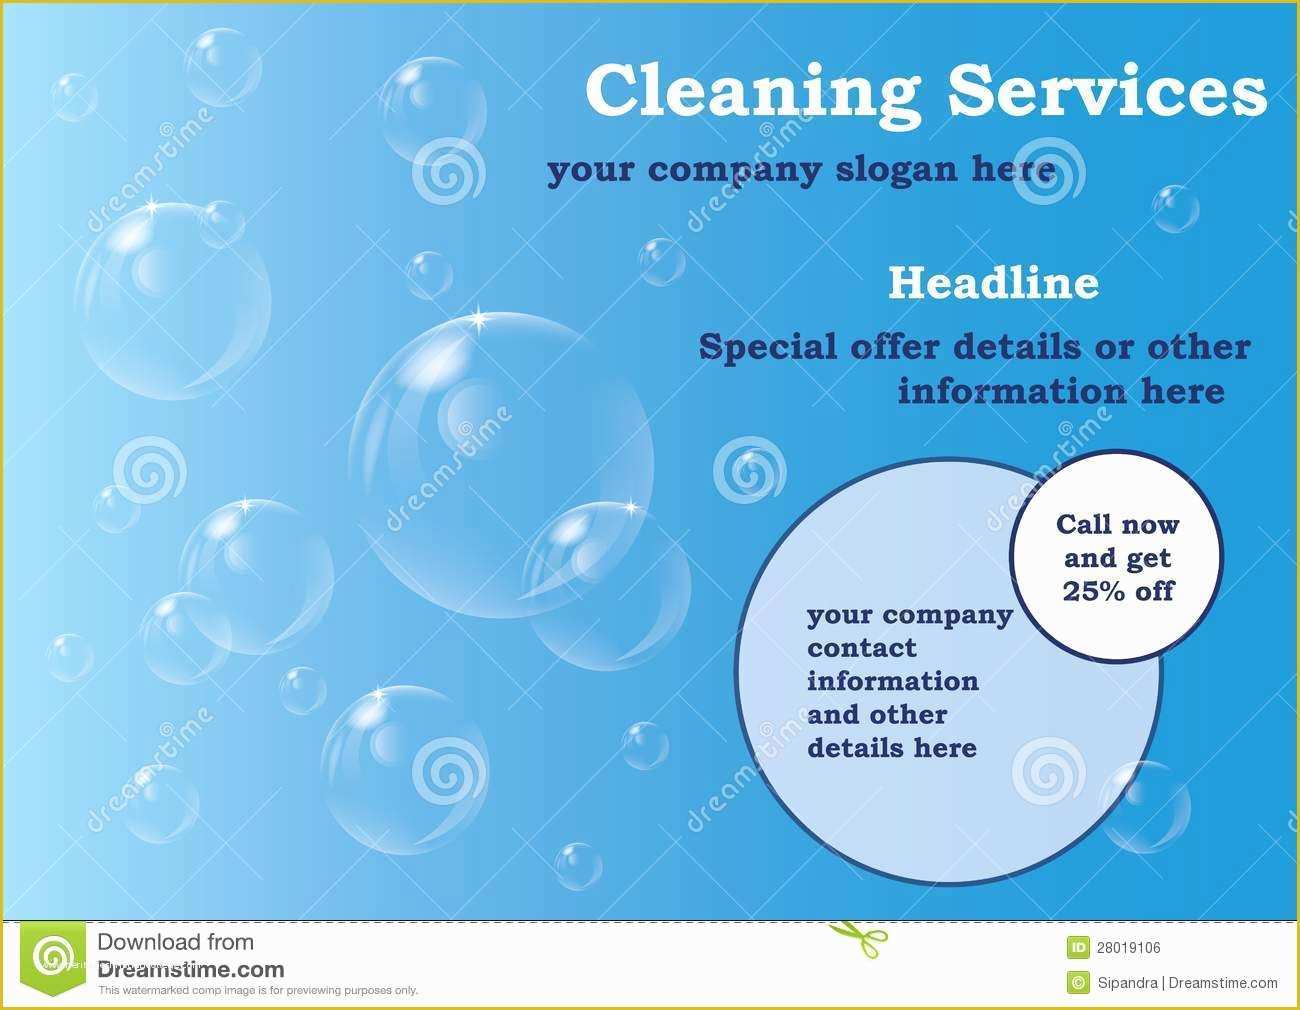 Cleaning Service Template Free Of Cleaning Services Flyer Template Royalty Free Stock Image